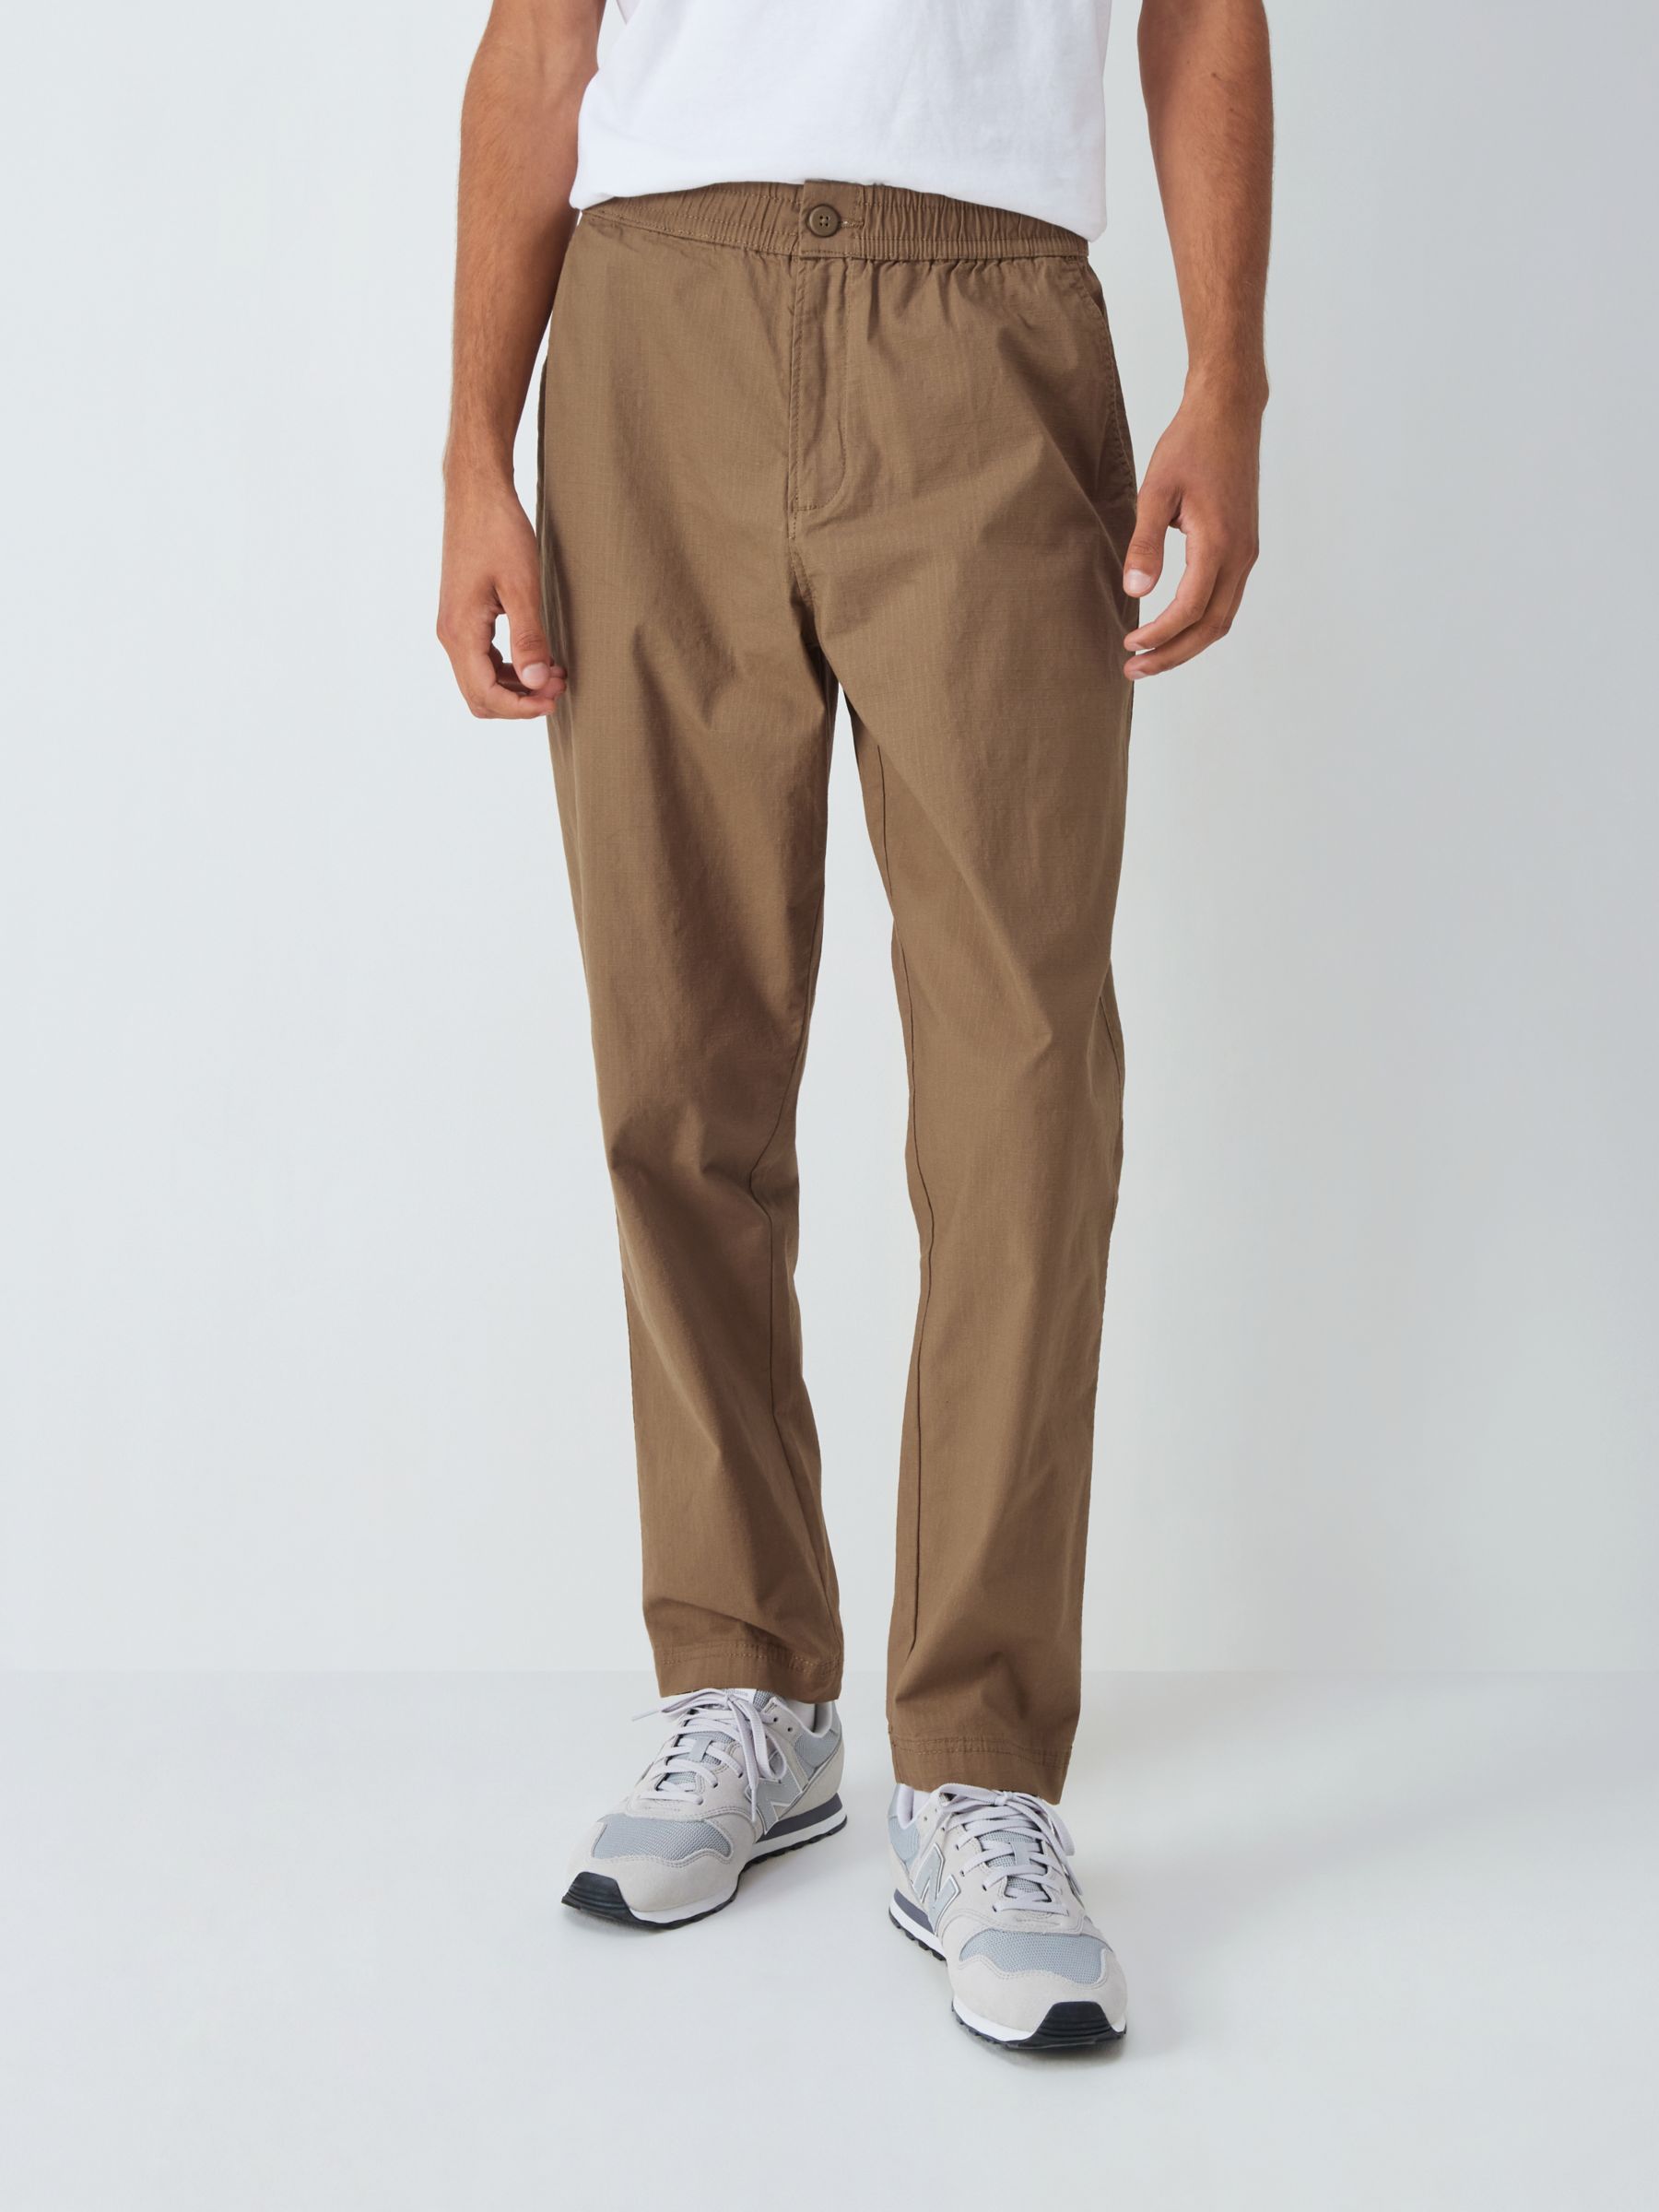 John Lewis ANYDAY Relaxed Fit Ripstop Stretch Cotton Ankle Trousers,  Chestnut at John Lewis & Partners